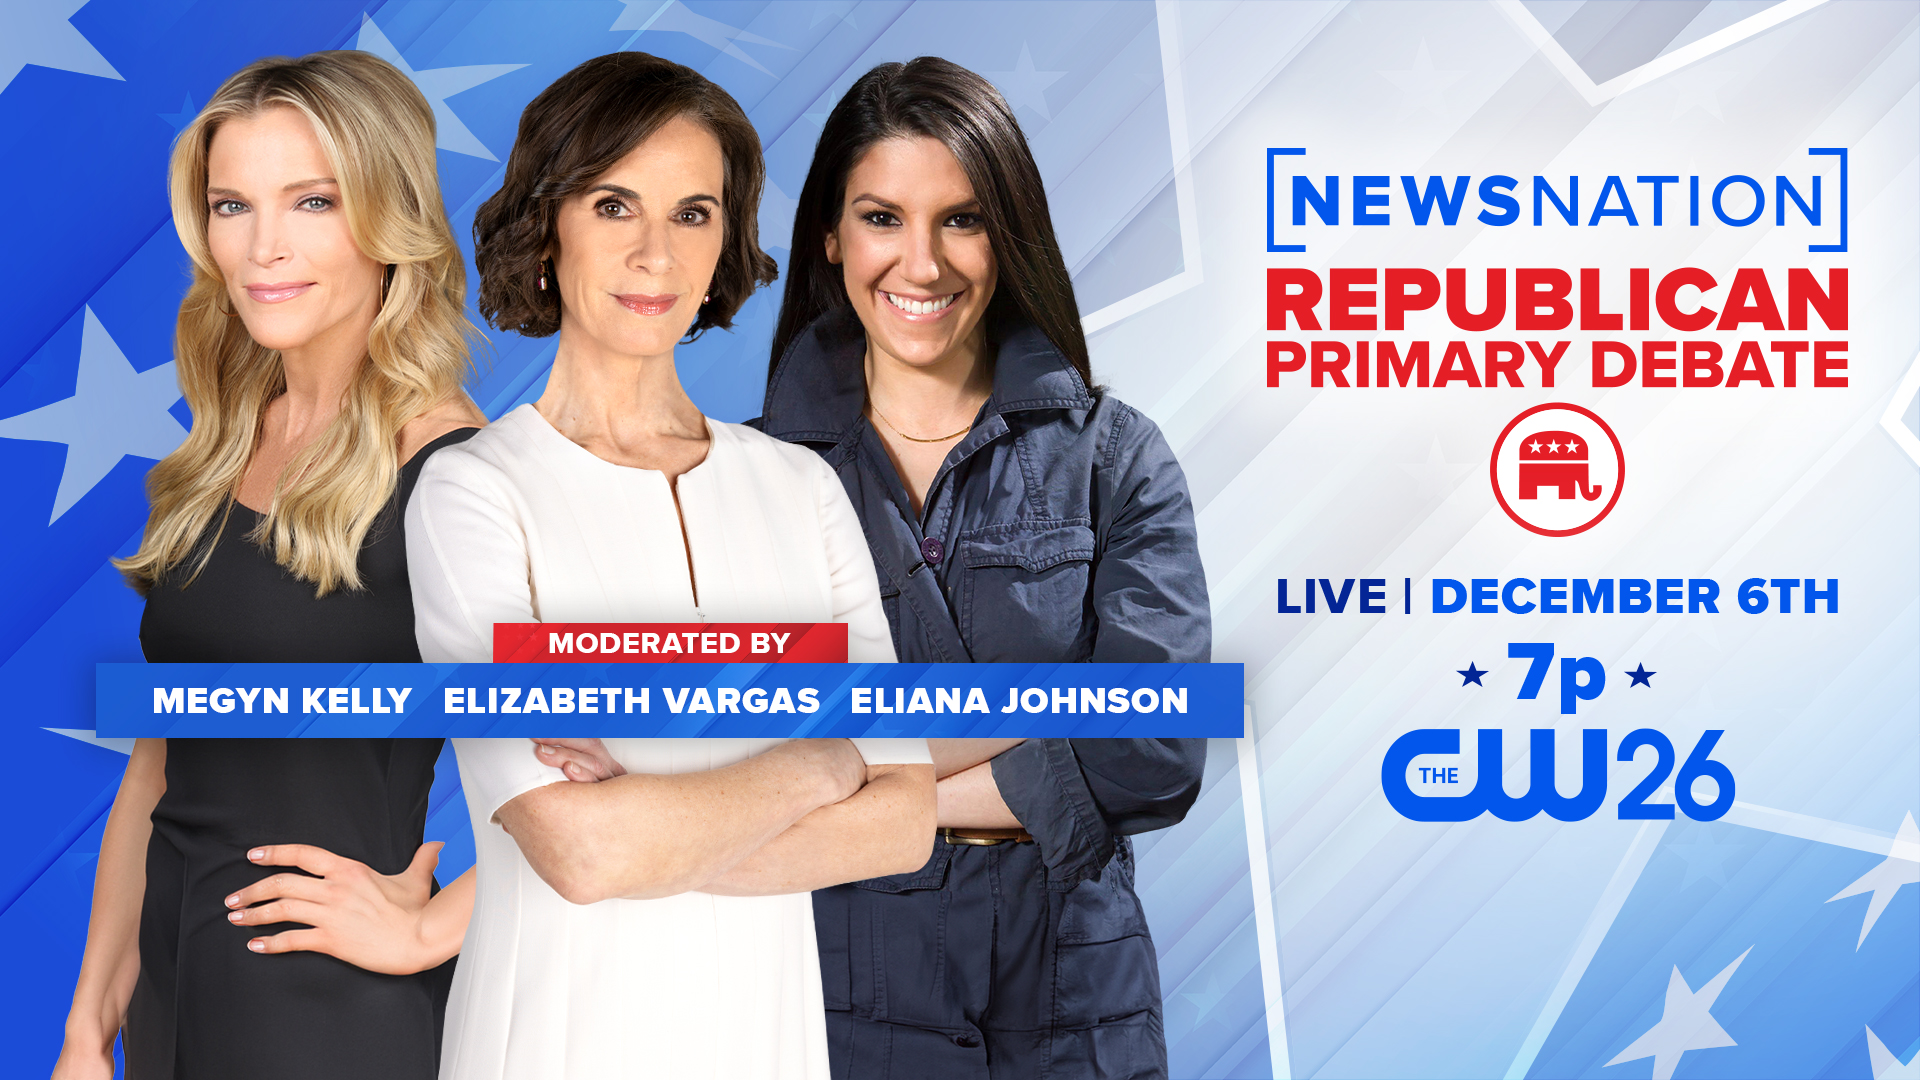 CW26 Watch the 2024 Republican Presidential Primary Debate Live on CW26